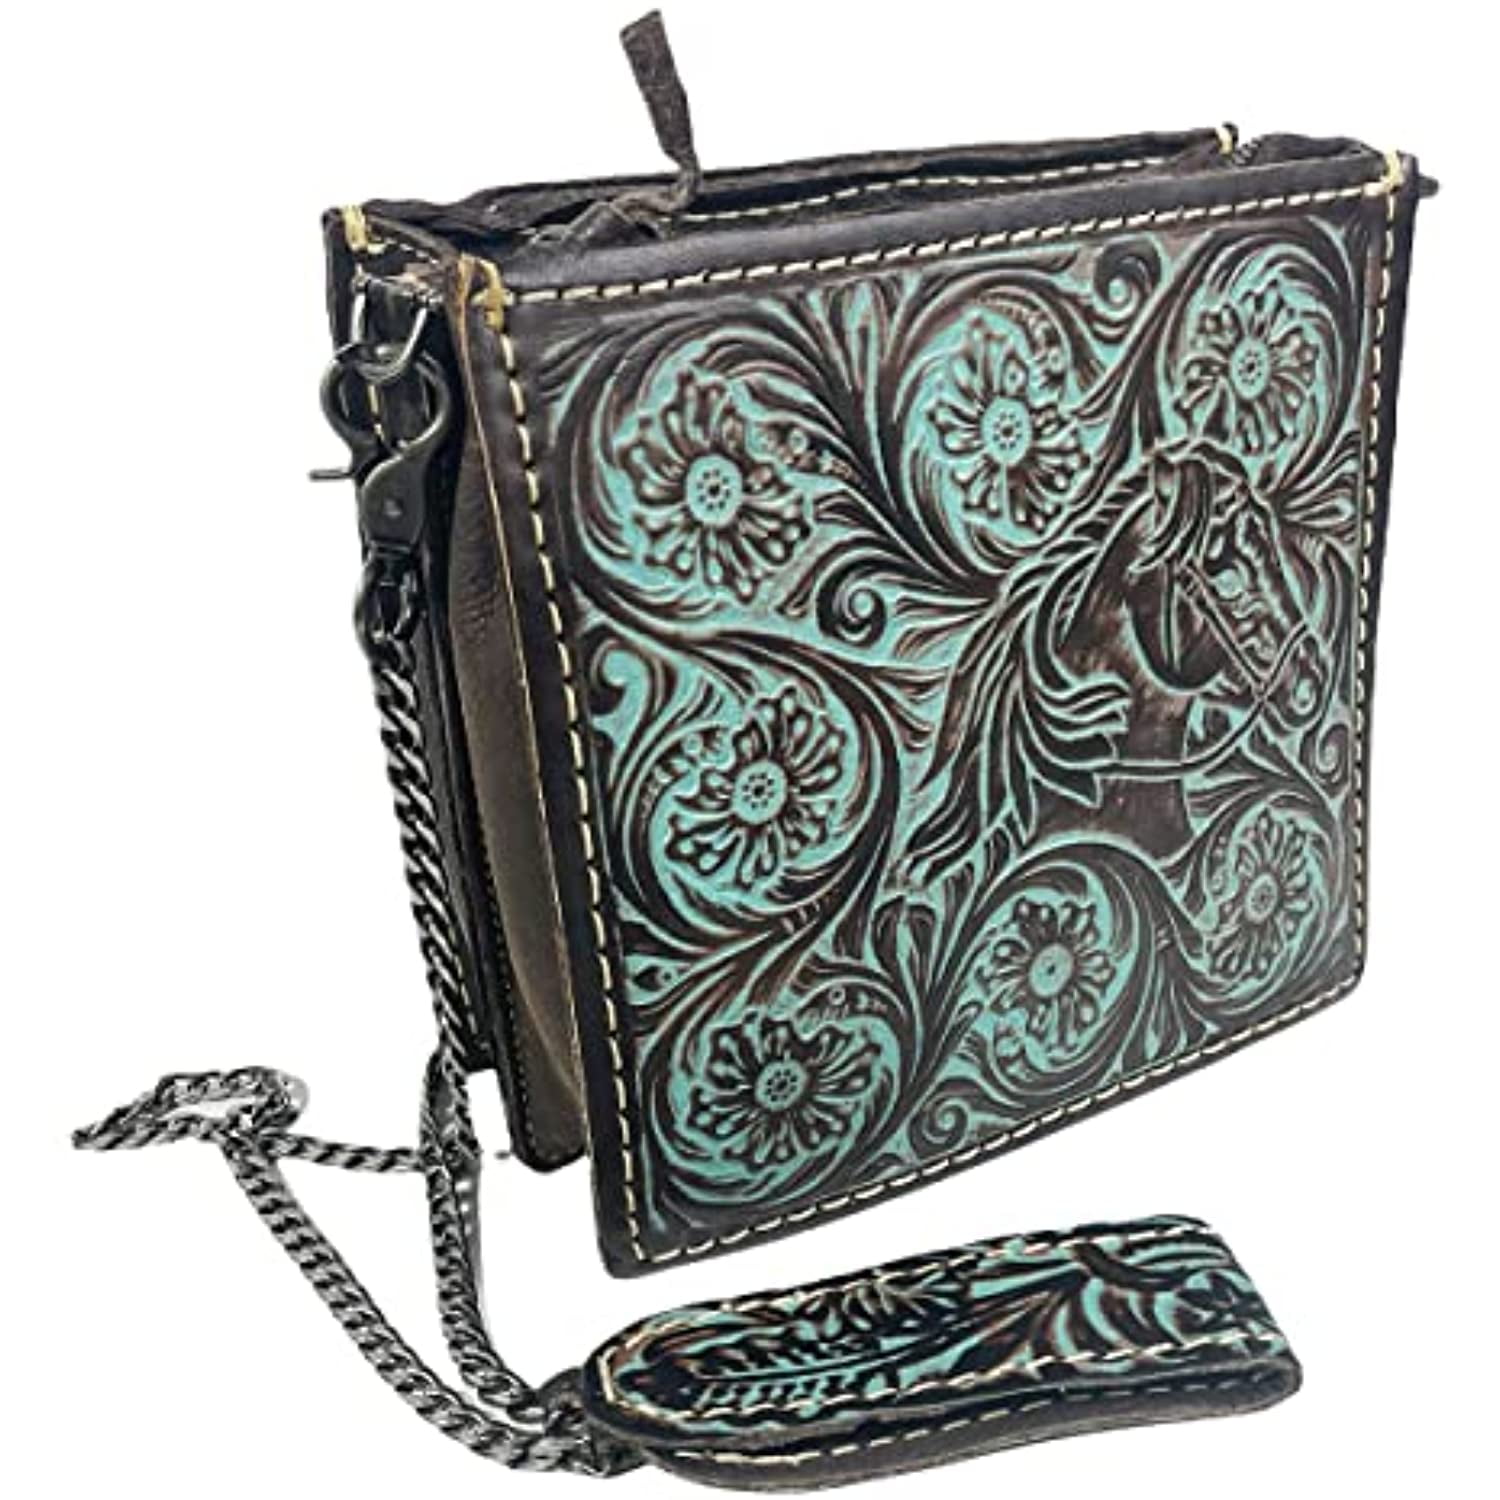 Buy Clutch Purse Wallet for Women's Faux Leather Casual Hand Purse for Ladies  Girls Multi Color [504] at Amazon.in